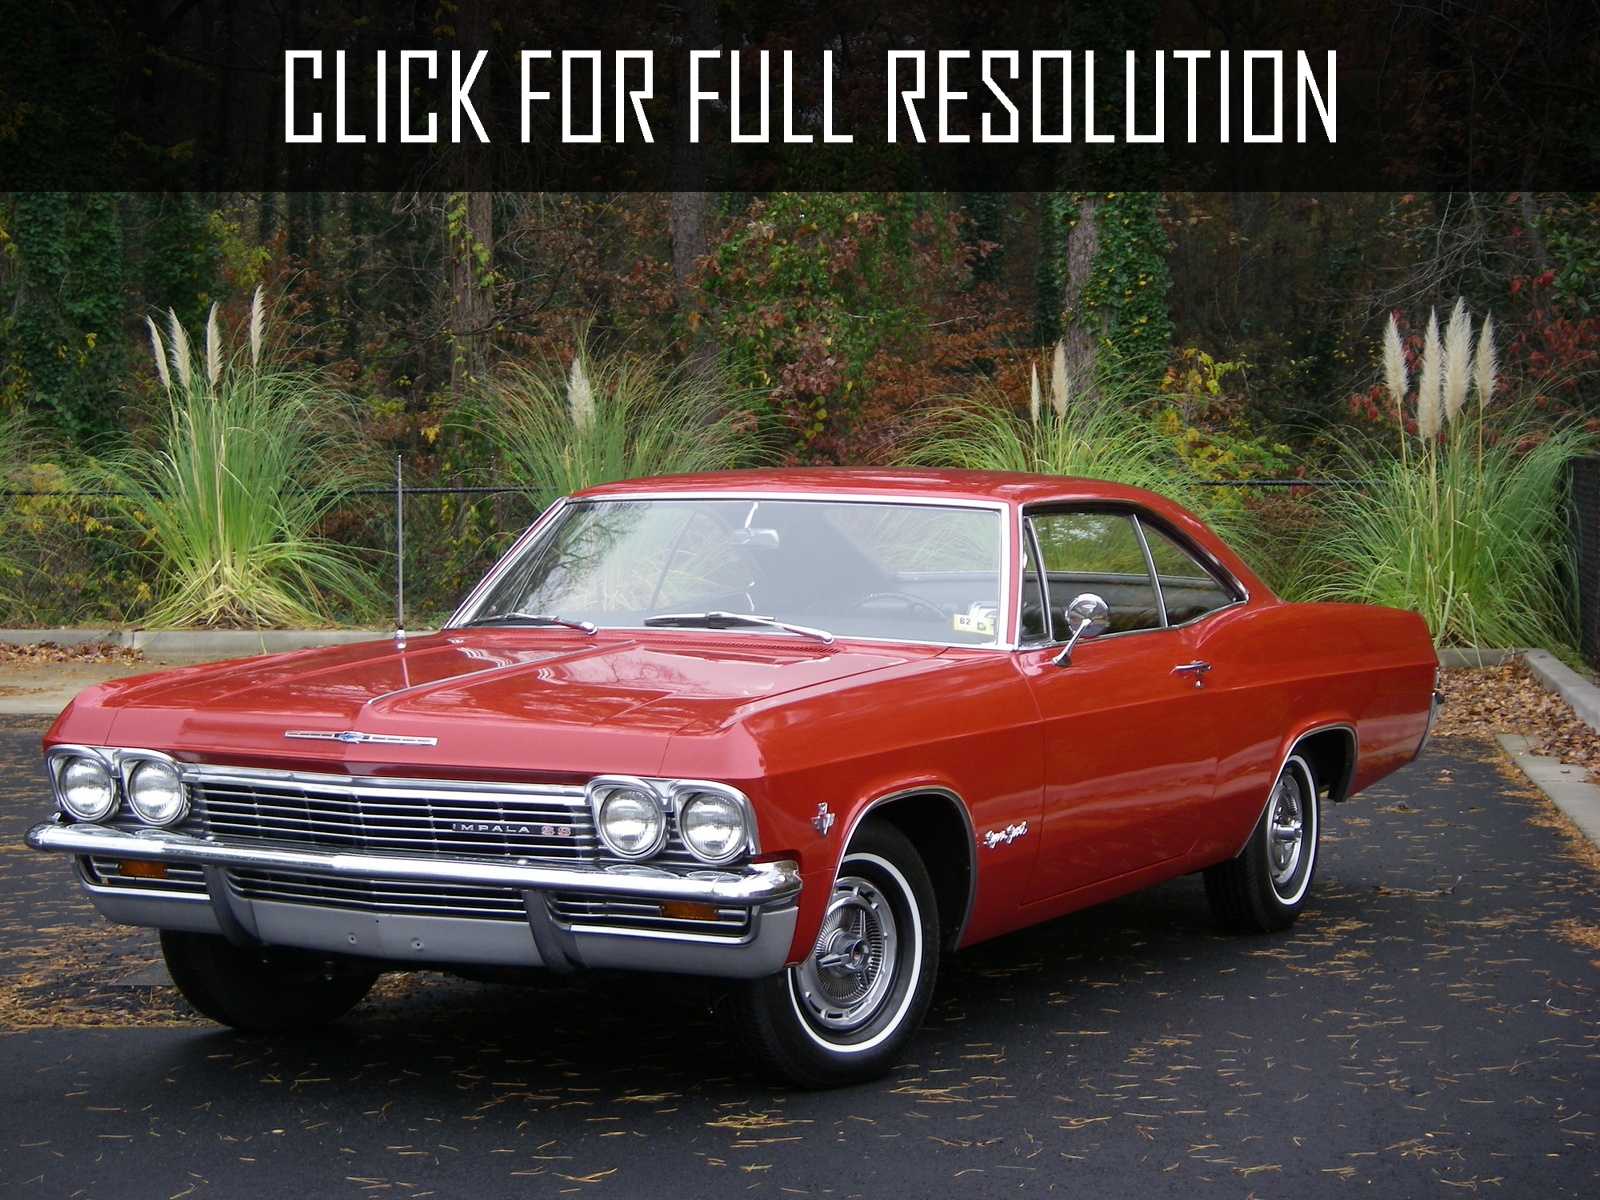 Chevrolet Impala Ss 1965 reviews, prices, ratings with